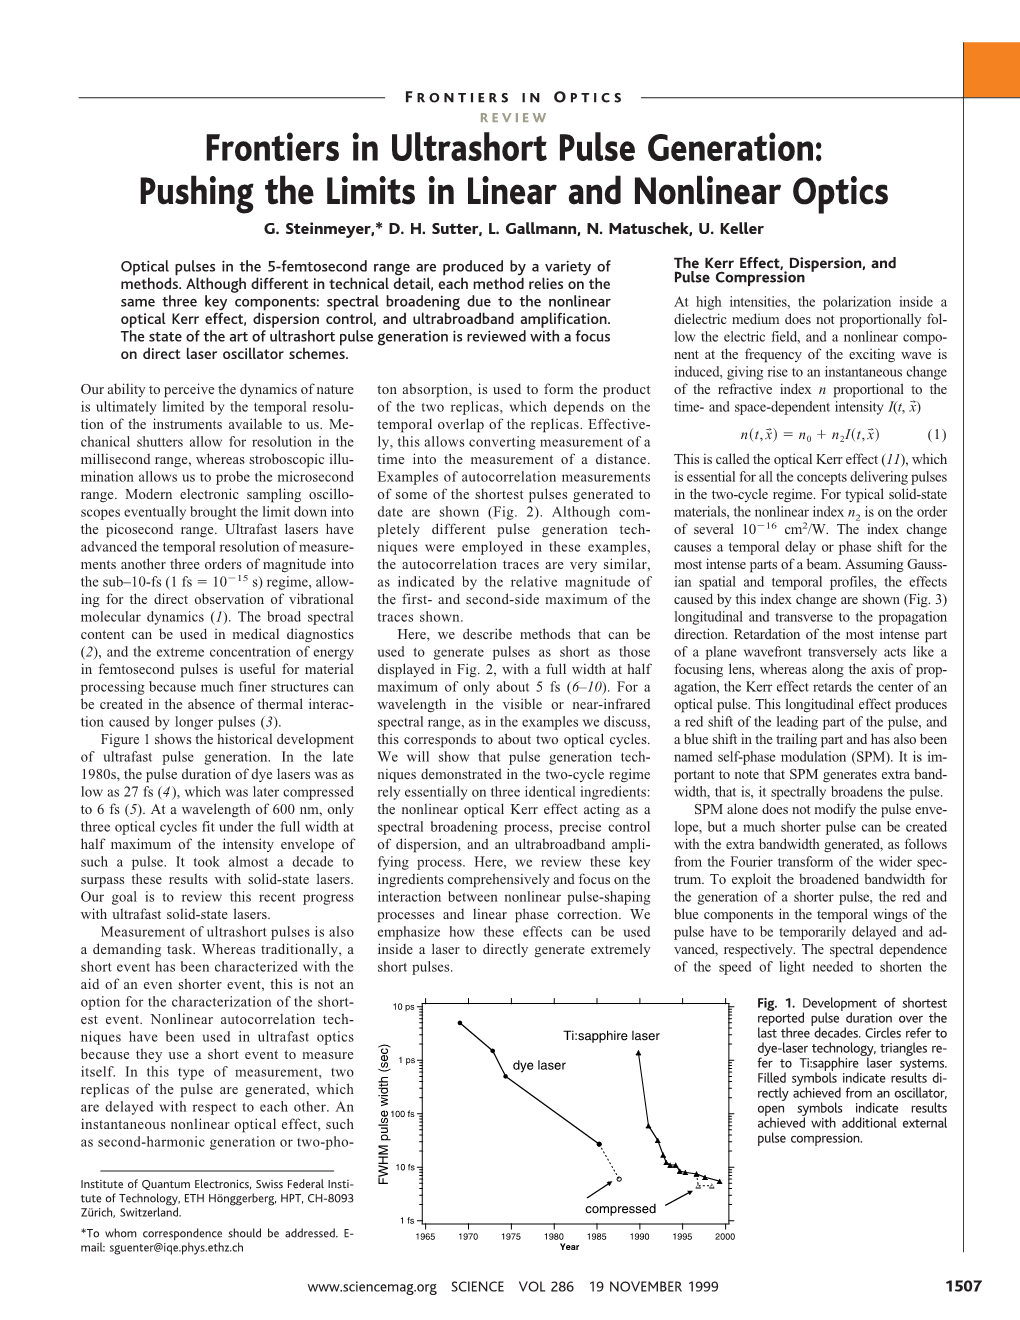 Pushing the Limits in Linear and Nonlinear Optics G